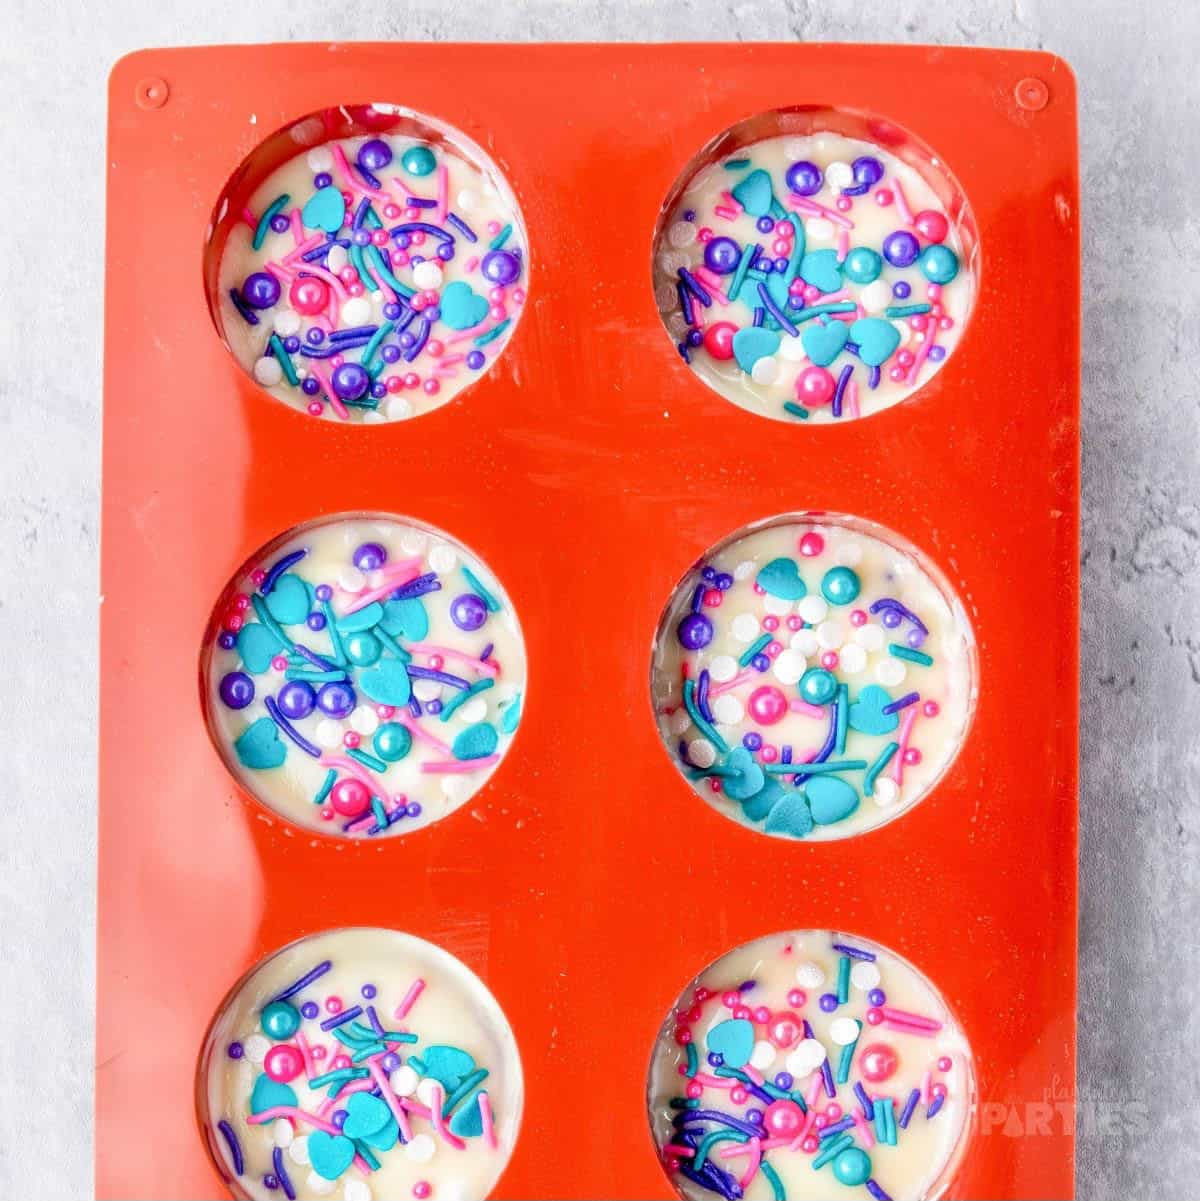 A mold filled with white chocolate and decorated with purple, blue, and pink sprinkles.